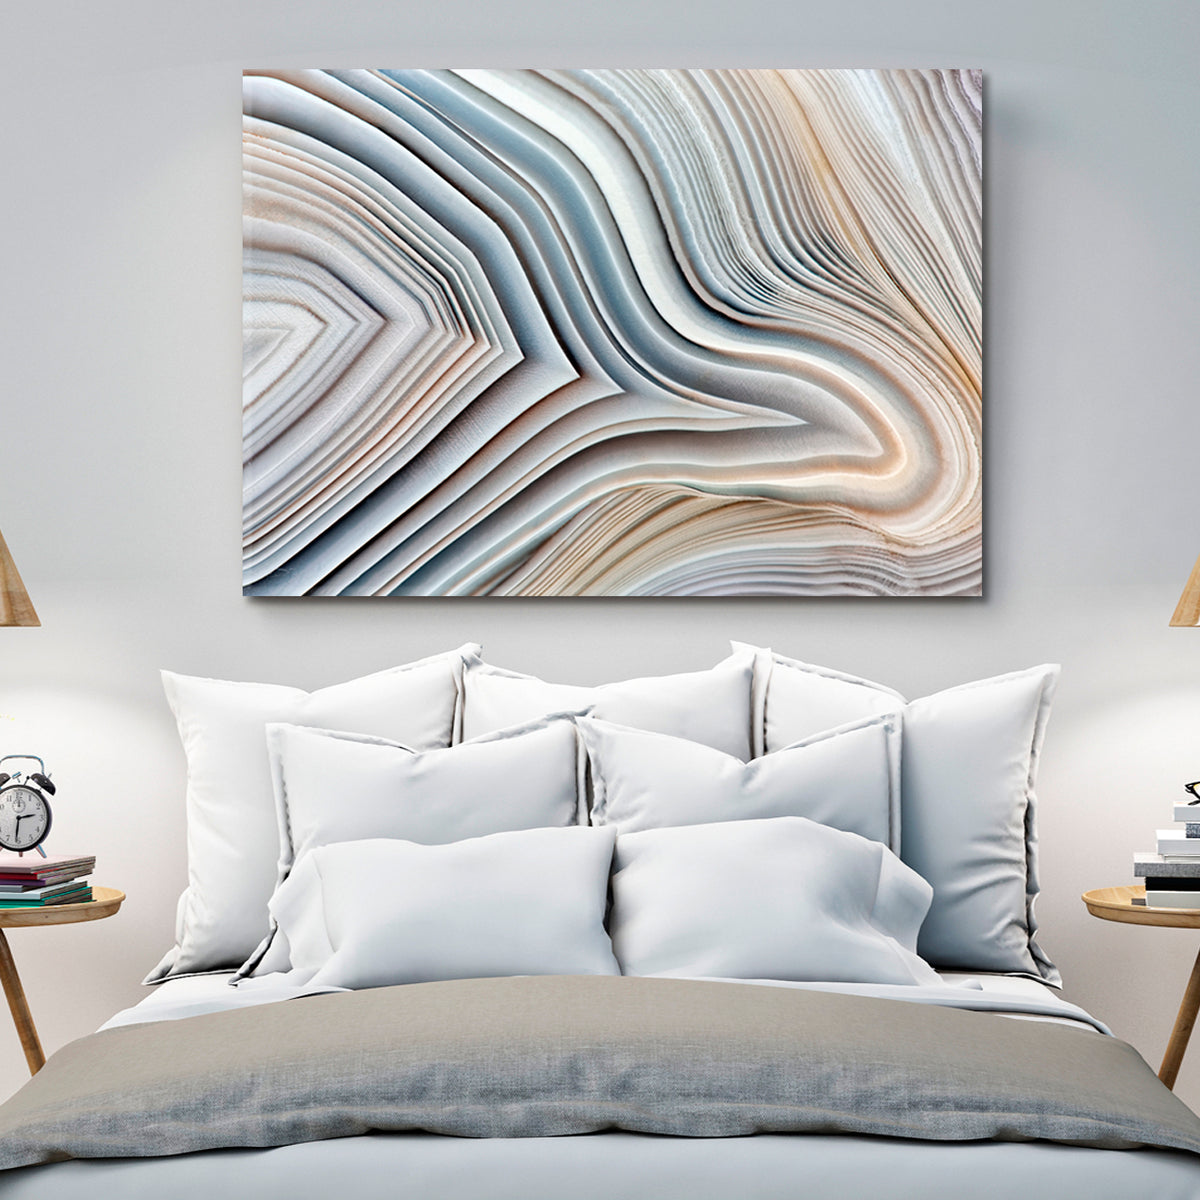 MARBLE ABSTRACT NATURALISM Amazing Agate Banded Crystal Fluid Art, Oriental Marbling Canvas Print Artesty 1 panel 24" x 16" 